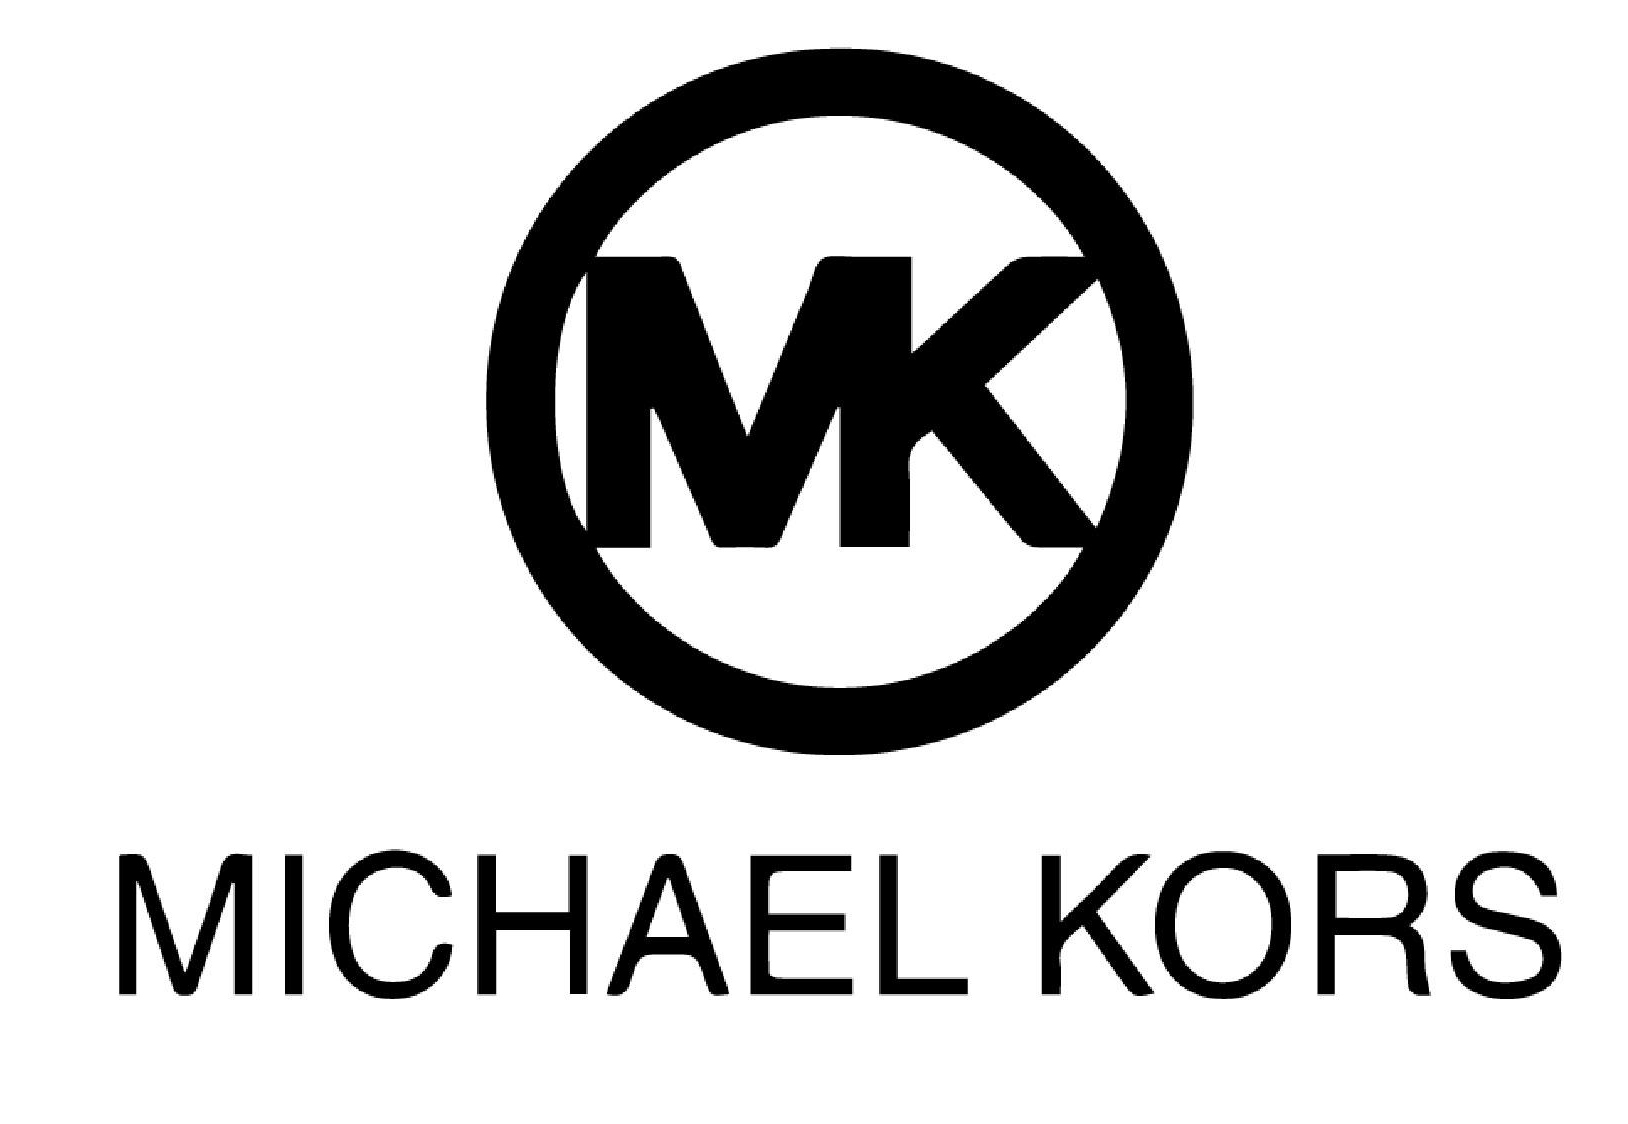 Buy Original Mk Products At Best Price in Tanzania